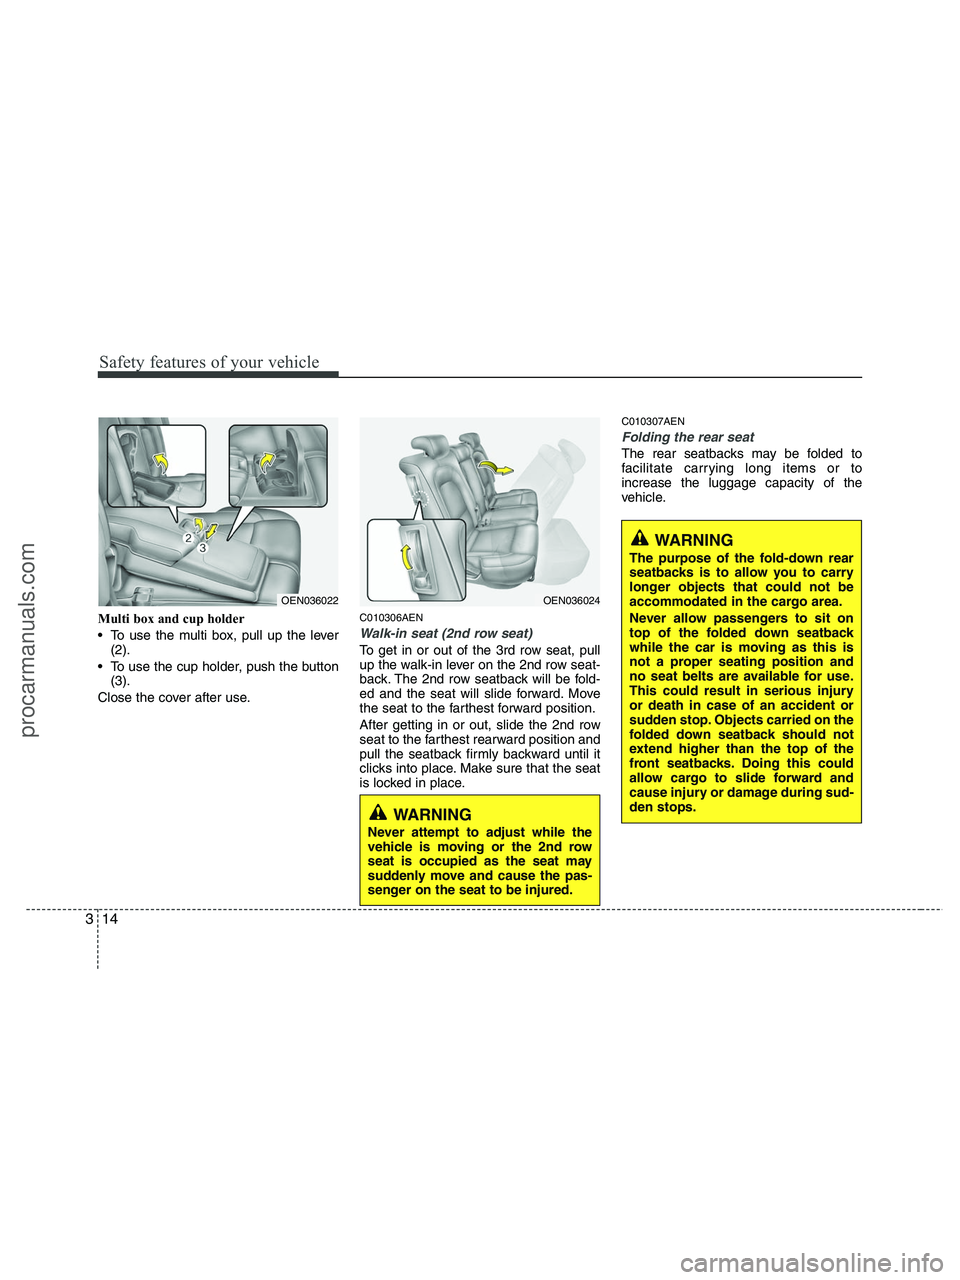 HYUNDAI VERACRUZ 2010 Owners Guide Safety features of your vehicle
14 3
Multi box and cup holder
 To use the multi box, pull up the lever
(2).
 To use the cup holder, push the button
(3).
Close the cover after use.C010306AEN
Walk-in se